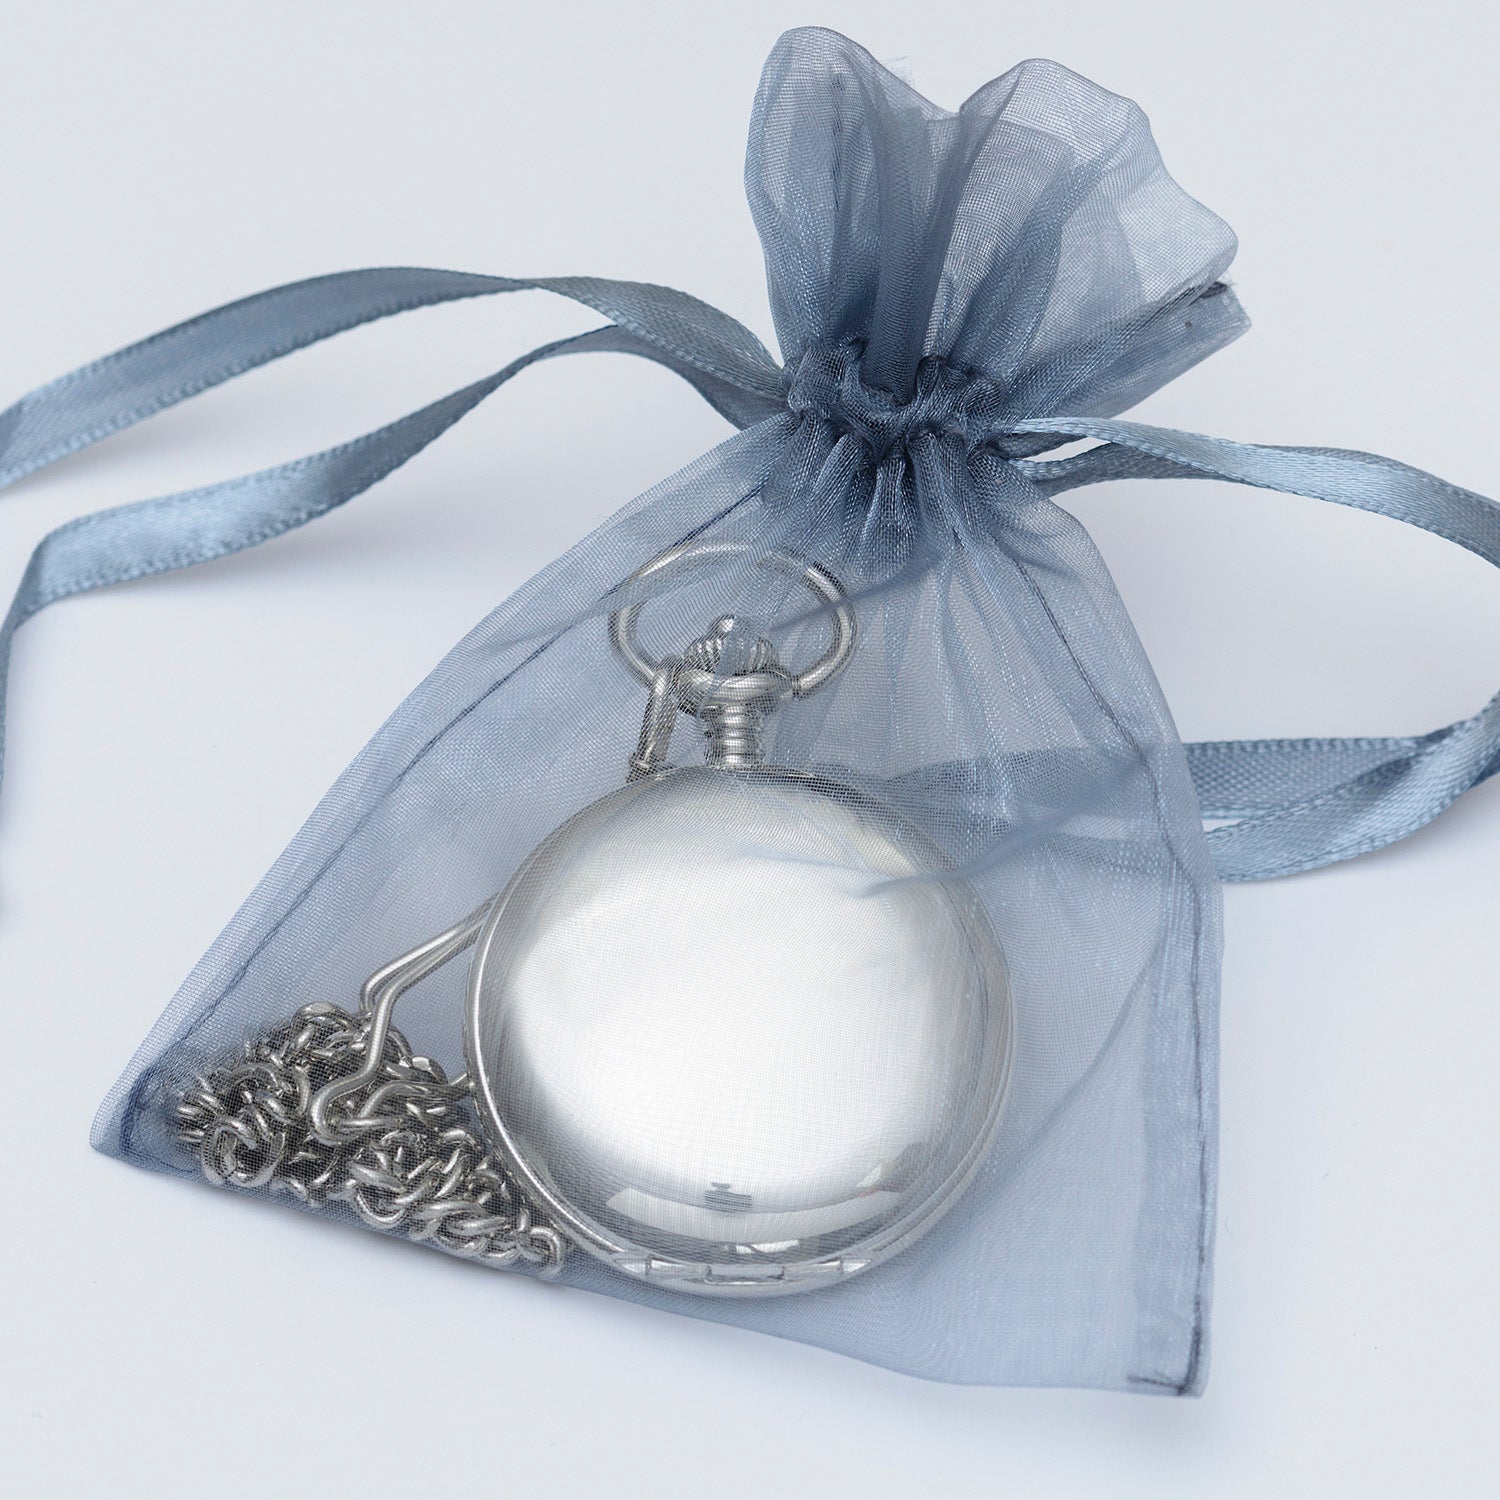 Engraved Pocket Watch For Groom - Meet Me At The Altar